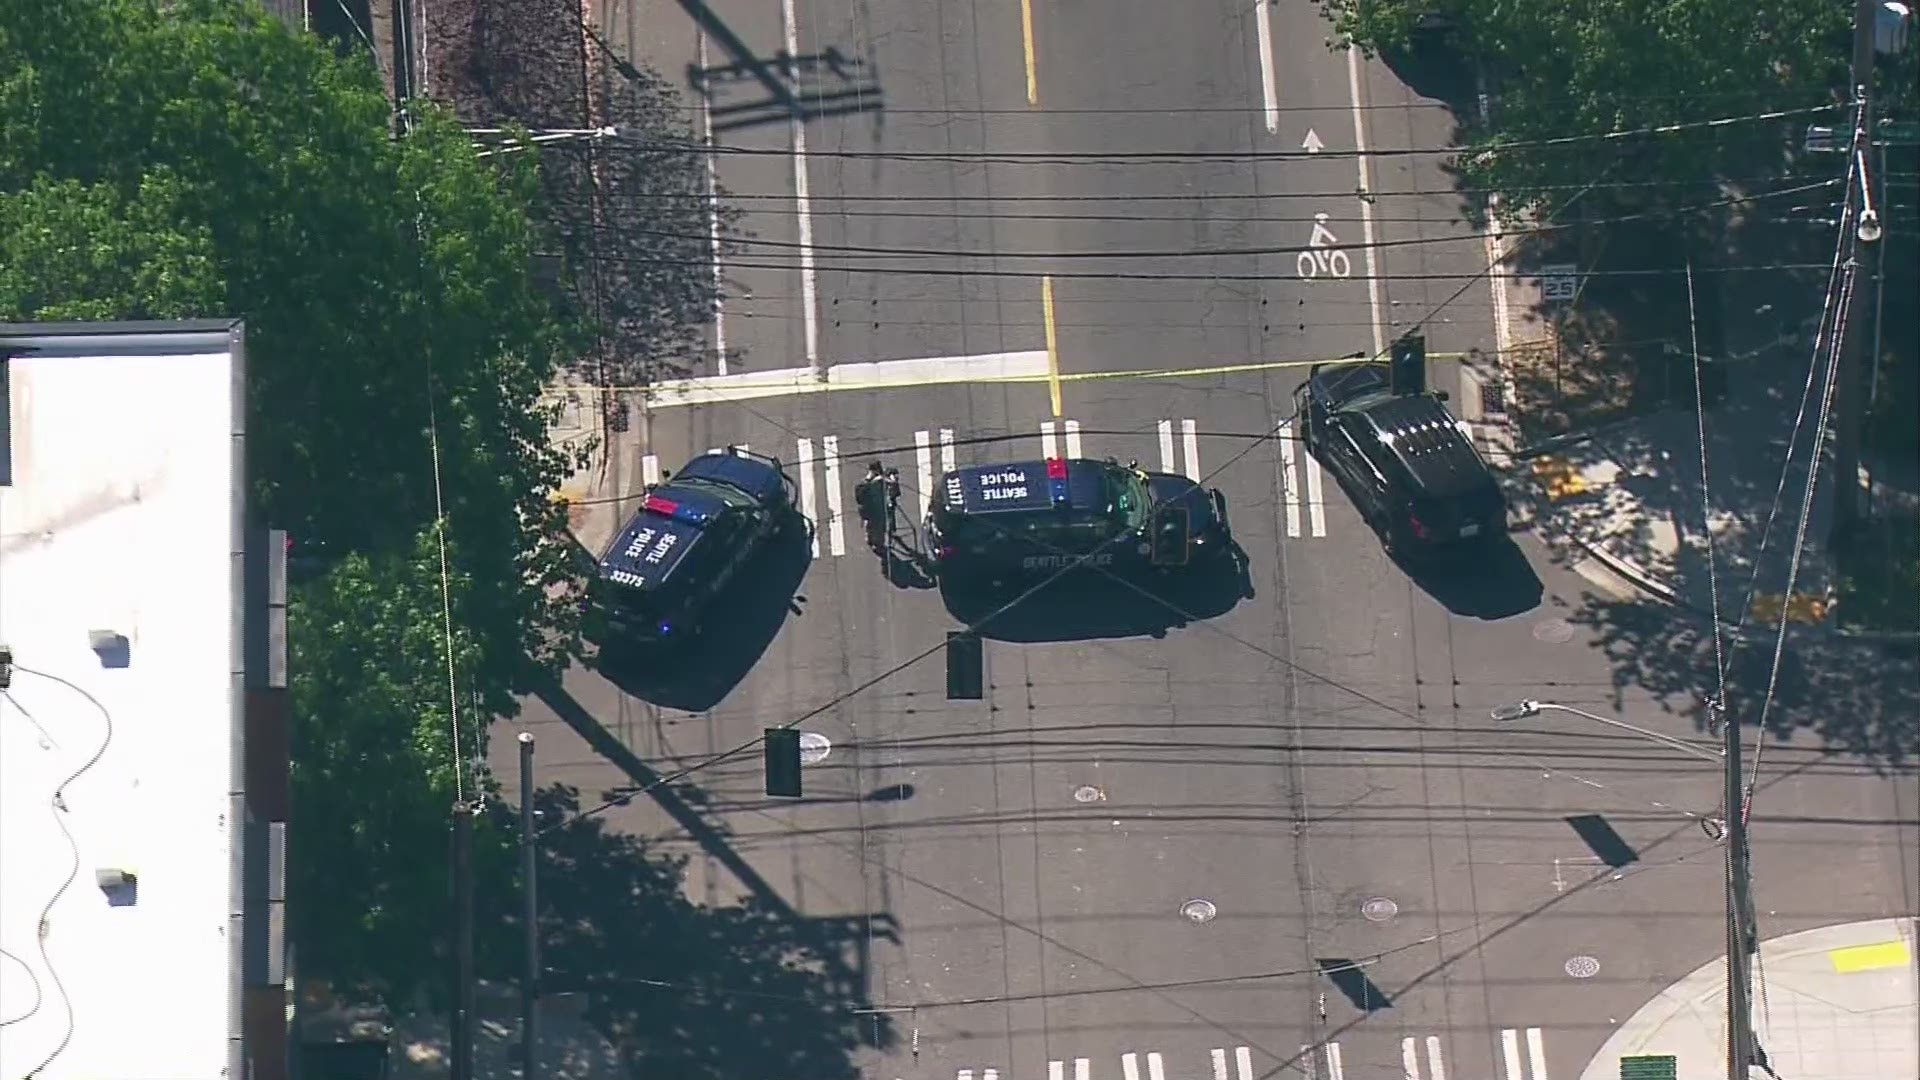 SkyKING flew over the scene of a shooting in Seattle’s Central District on Friday, May 10, 2019. Seattle police say multiple people were injured in the shooting near the intersection of 23rd Avenue and E. Union Street.